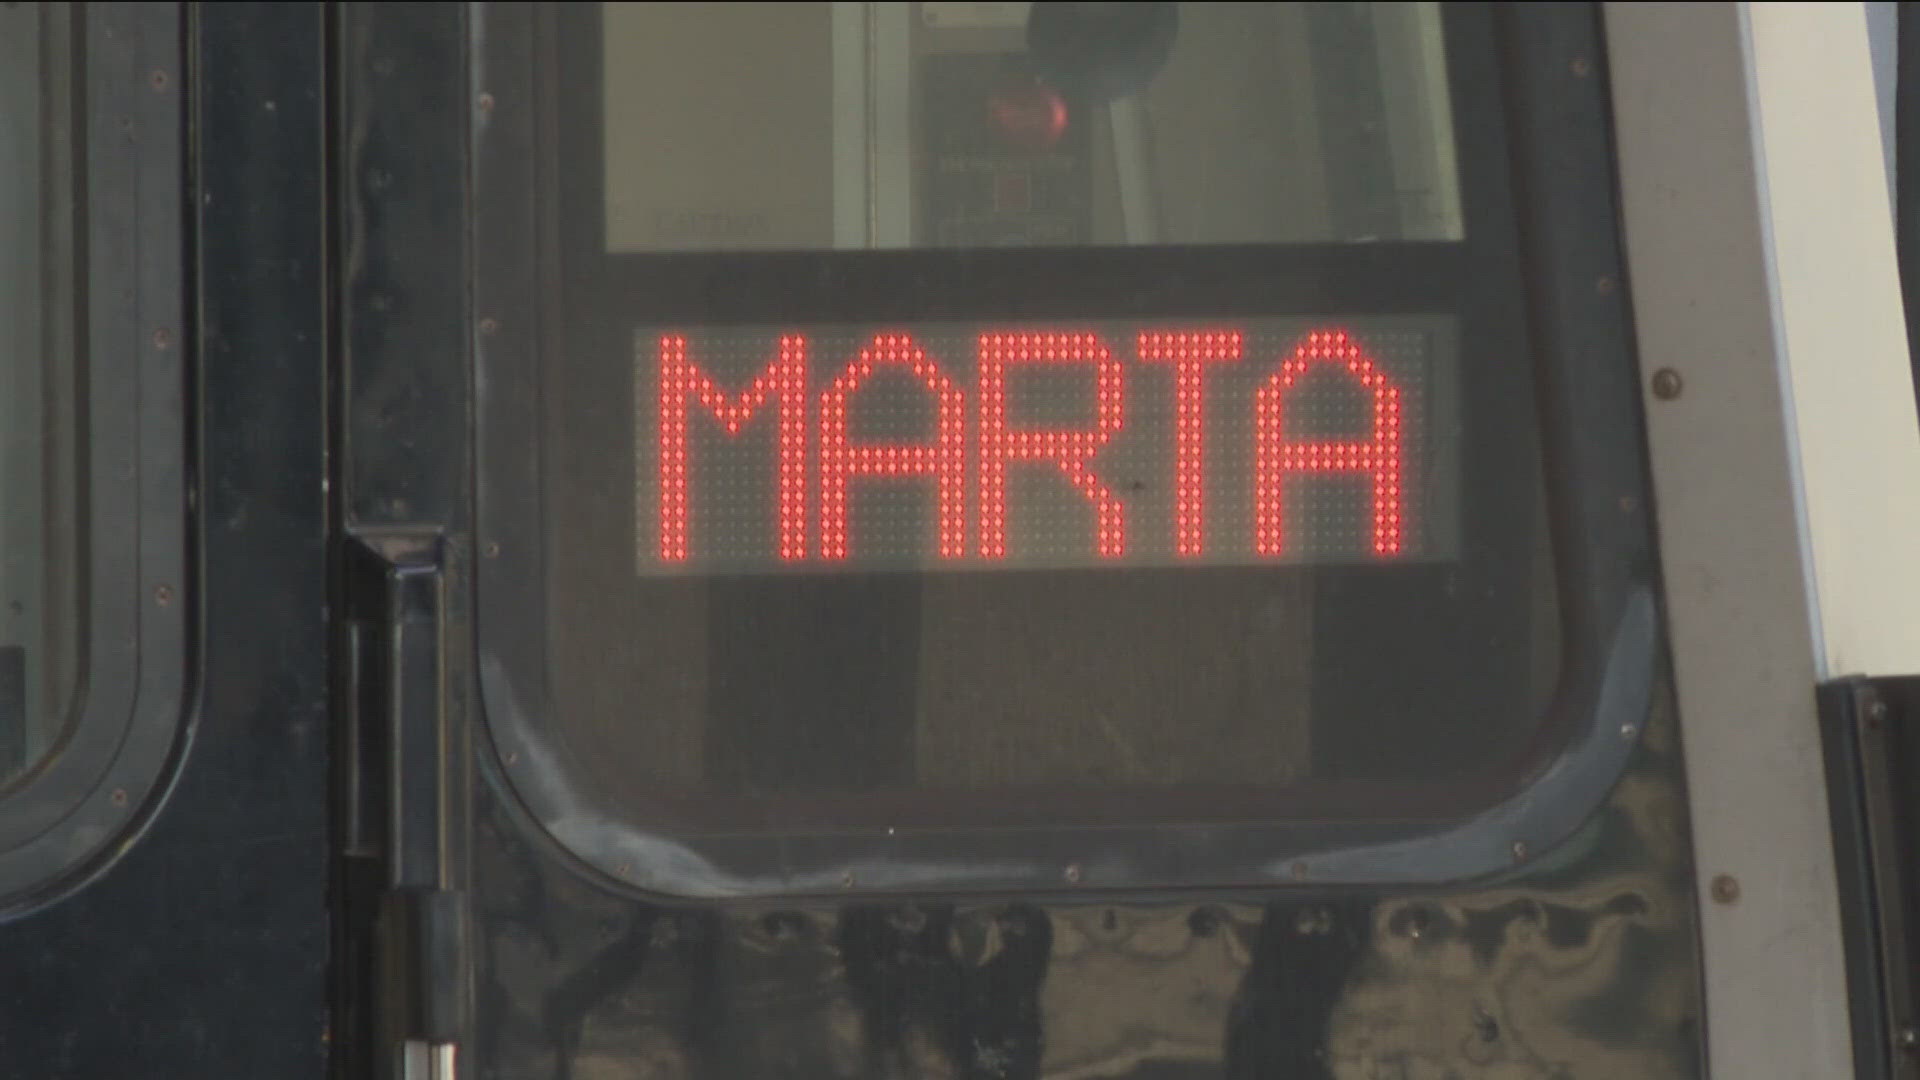 MARTA officials added that the person was transported to the hospital